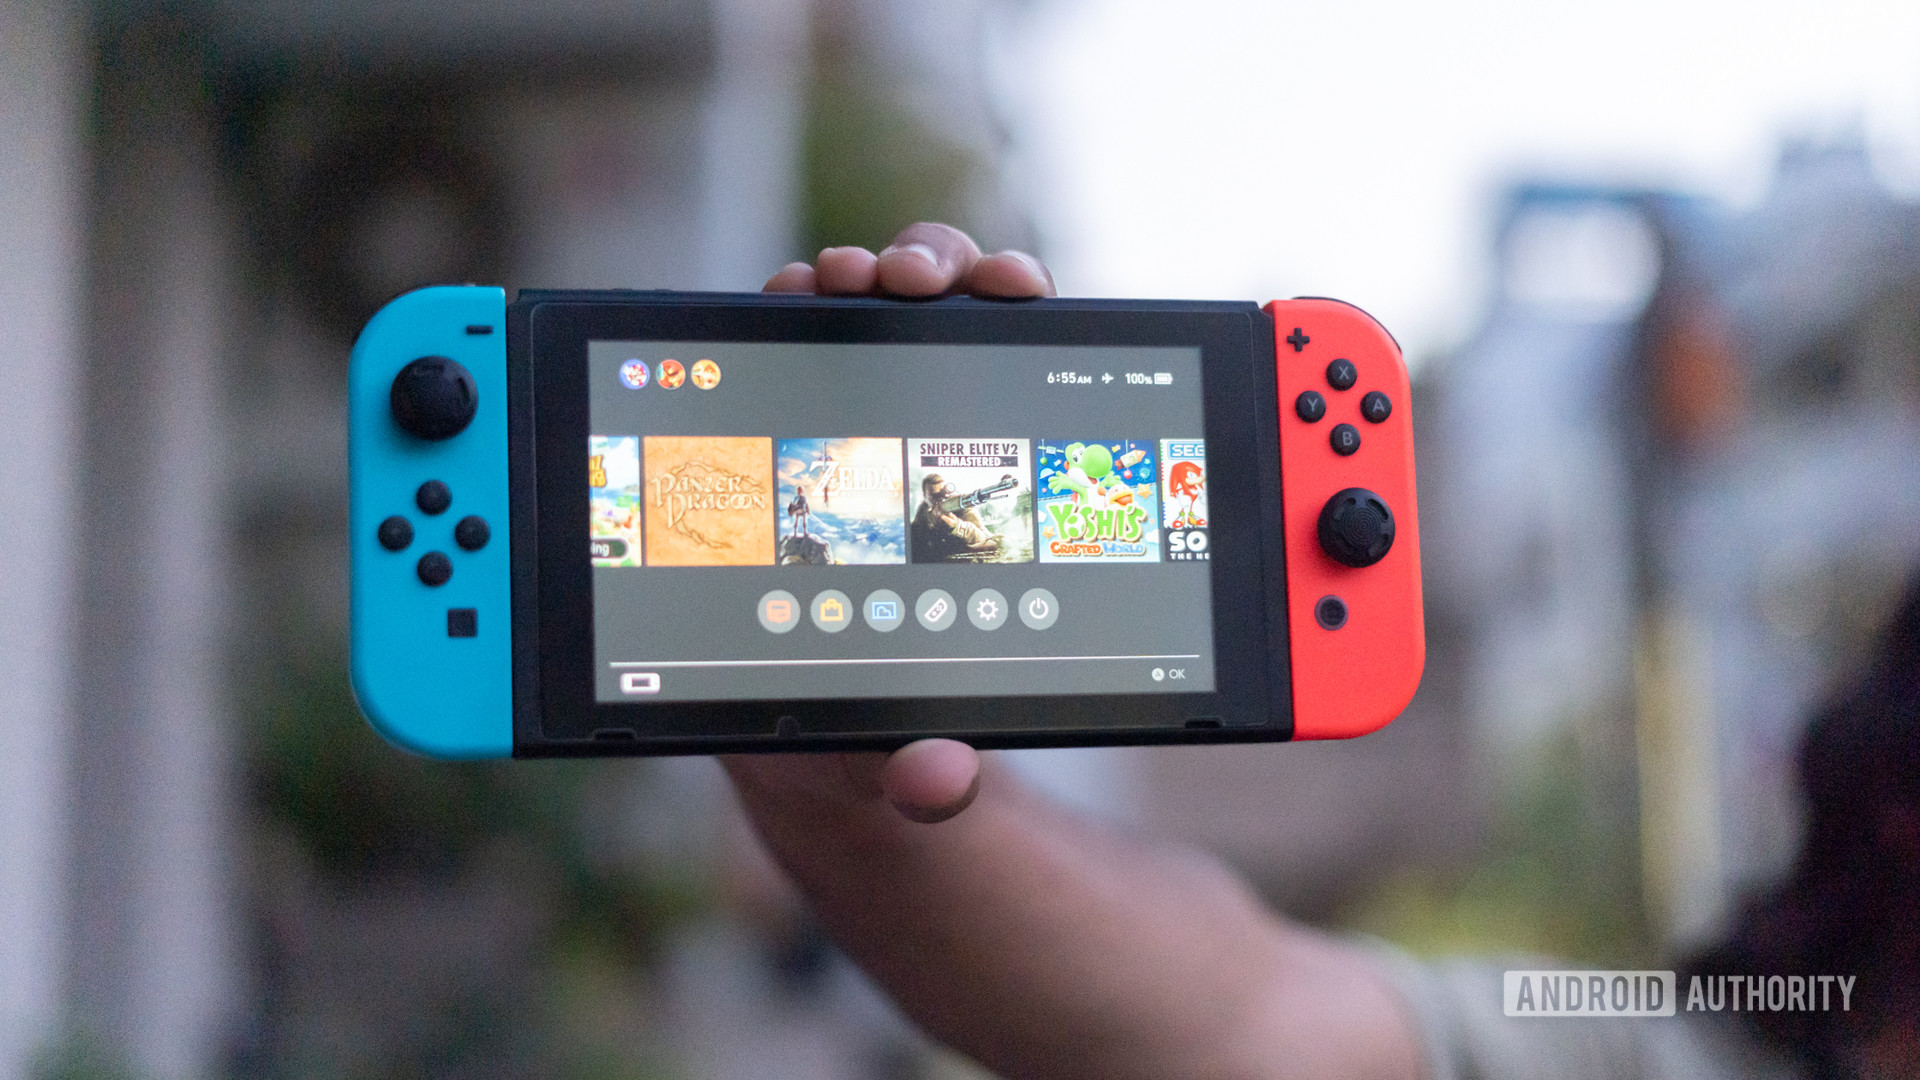 Nintendo Switch buying guide: What you need to know